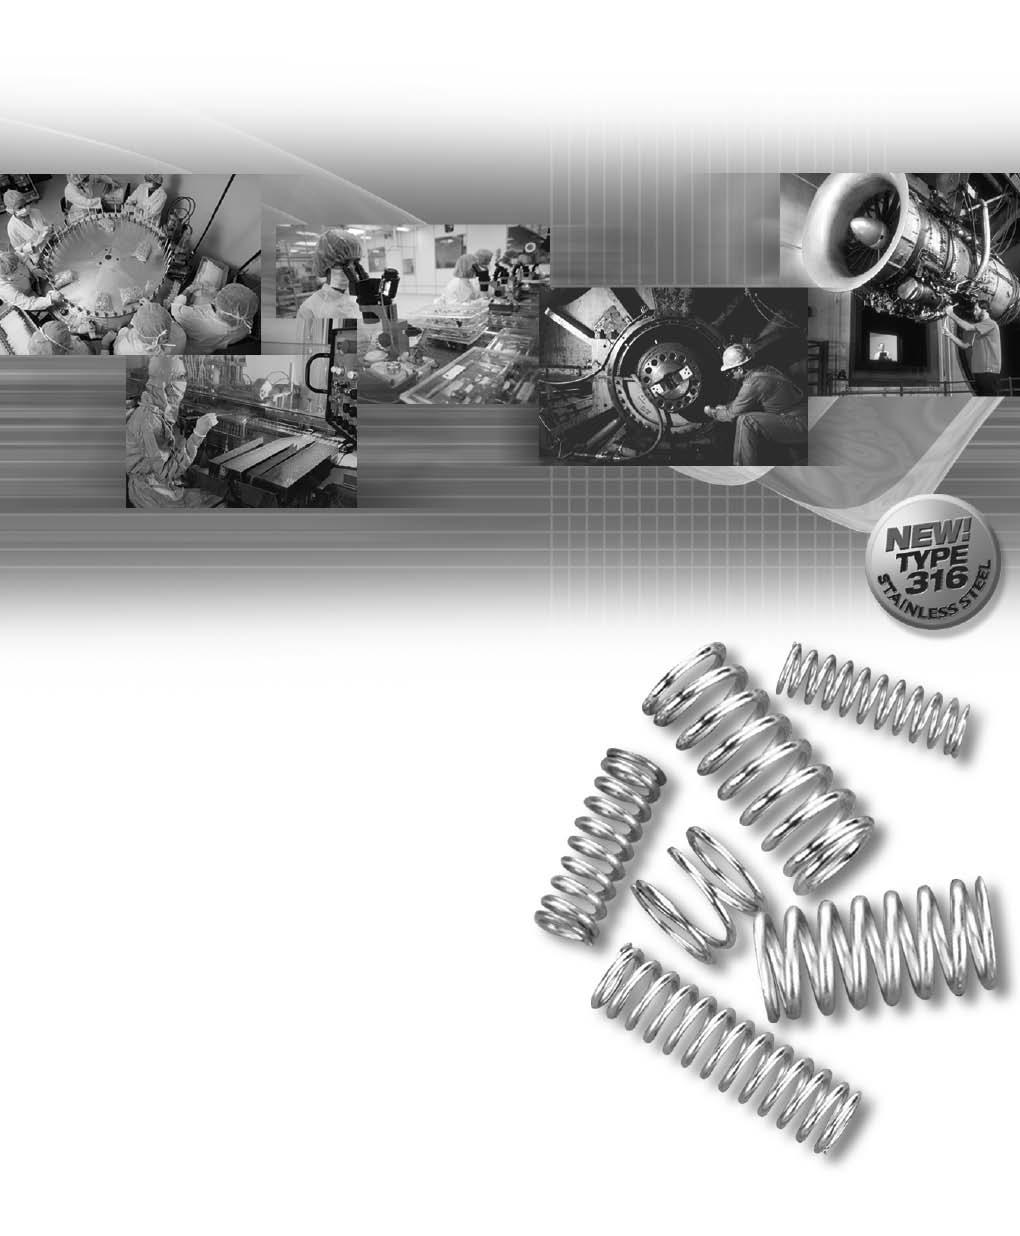 For critical applications... we ve got your spring. Introducing Type 316 Stainless Steel Stock Springs from Lee Spring. Today s manufacturing processes have ever-changing requirements.